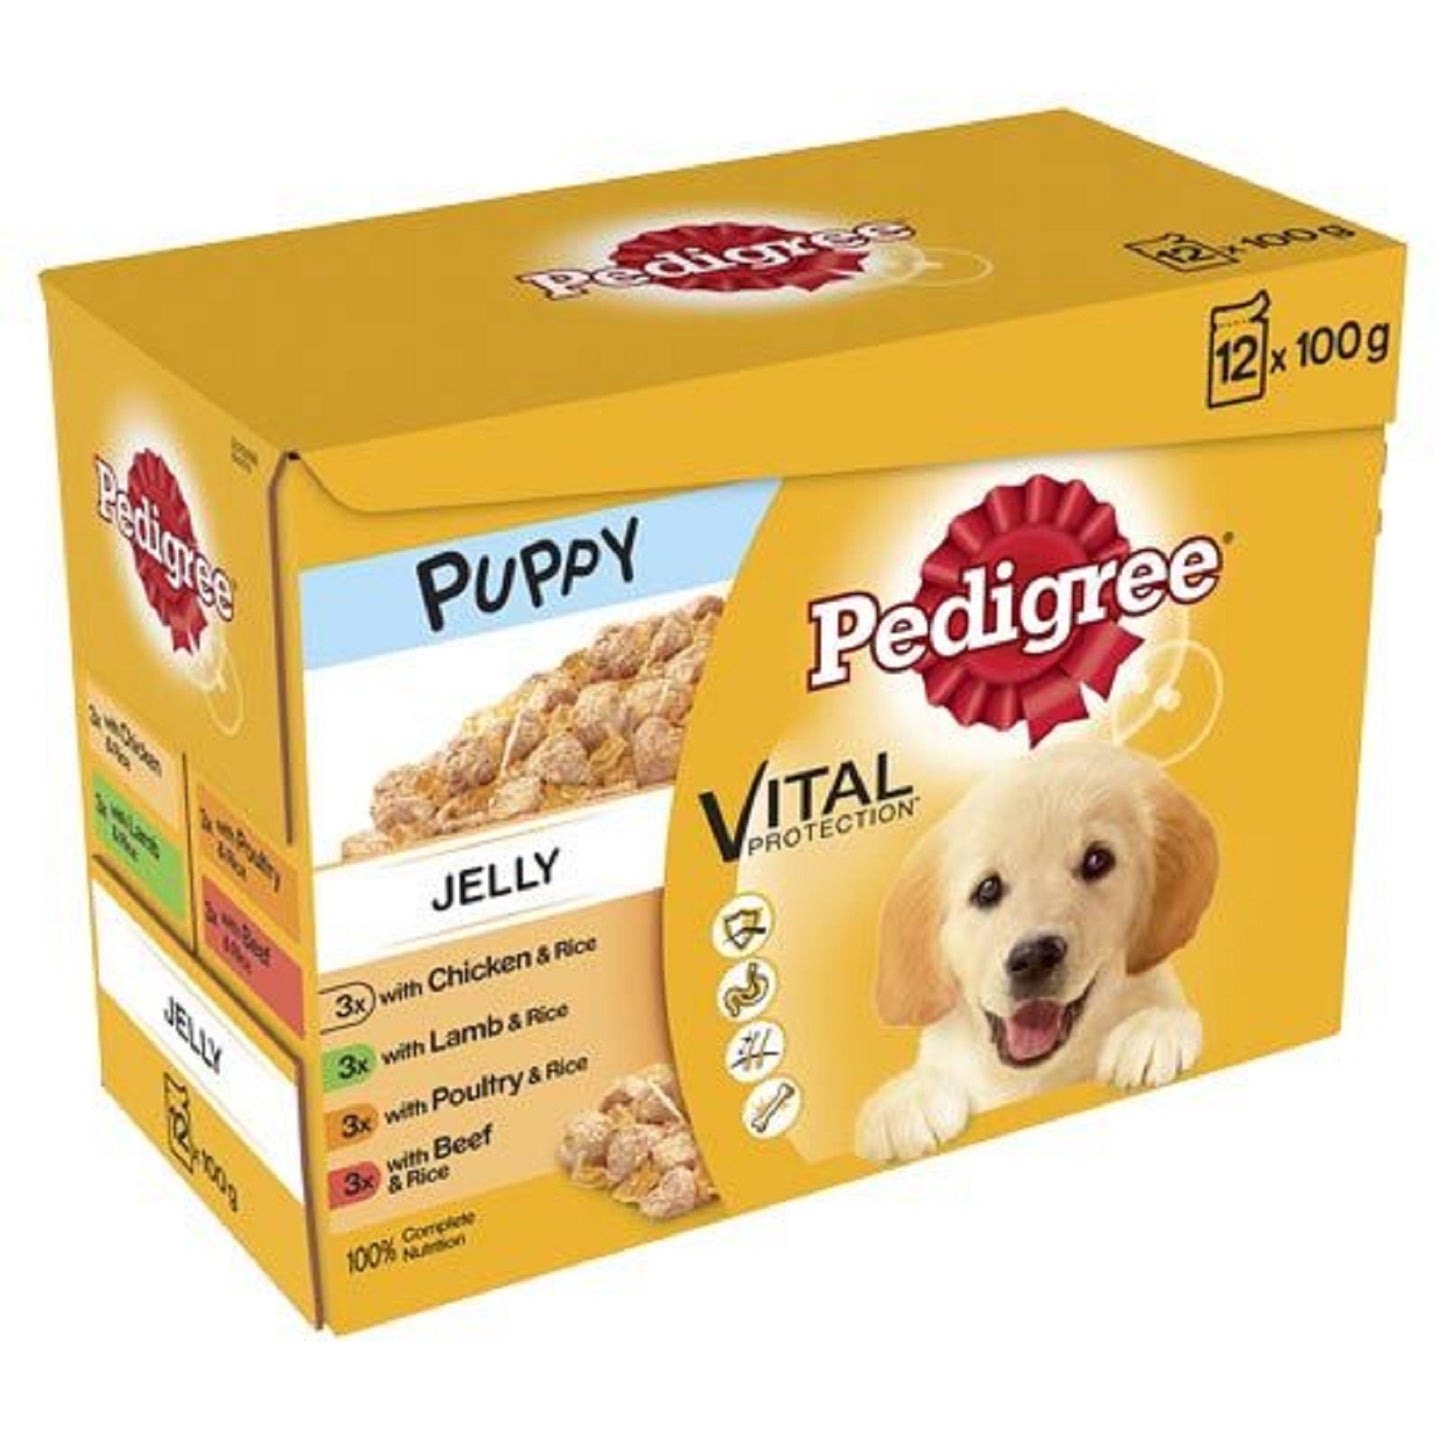 Pedigree - Pouches Puppy in Jelly (12 x 100g)